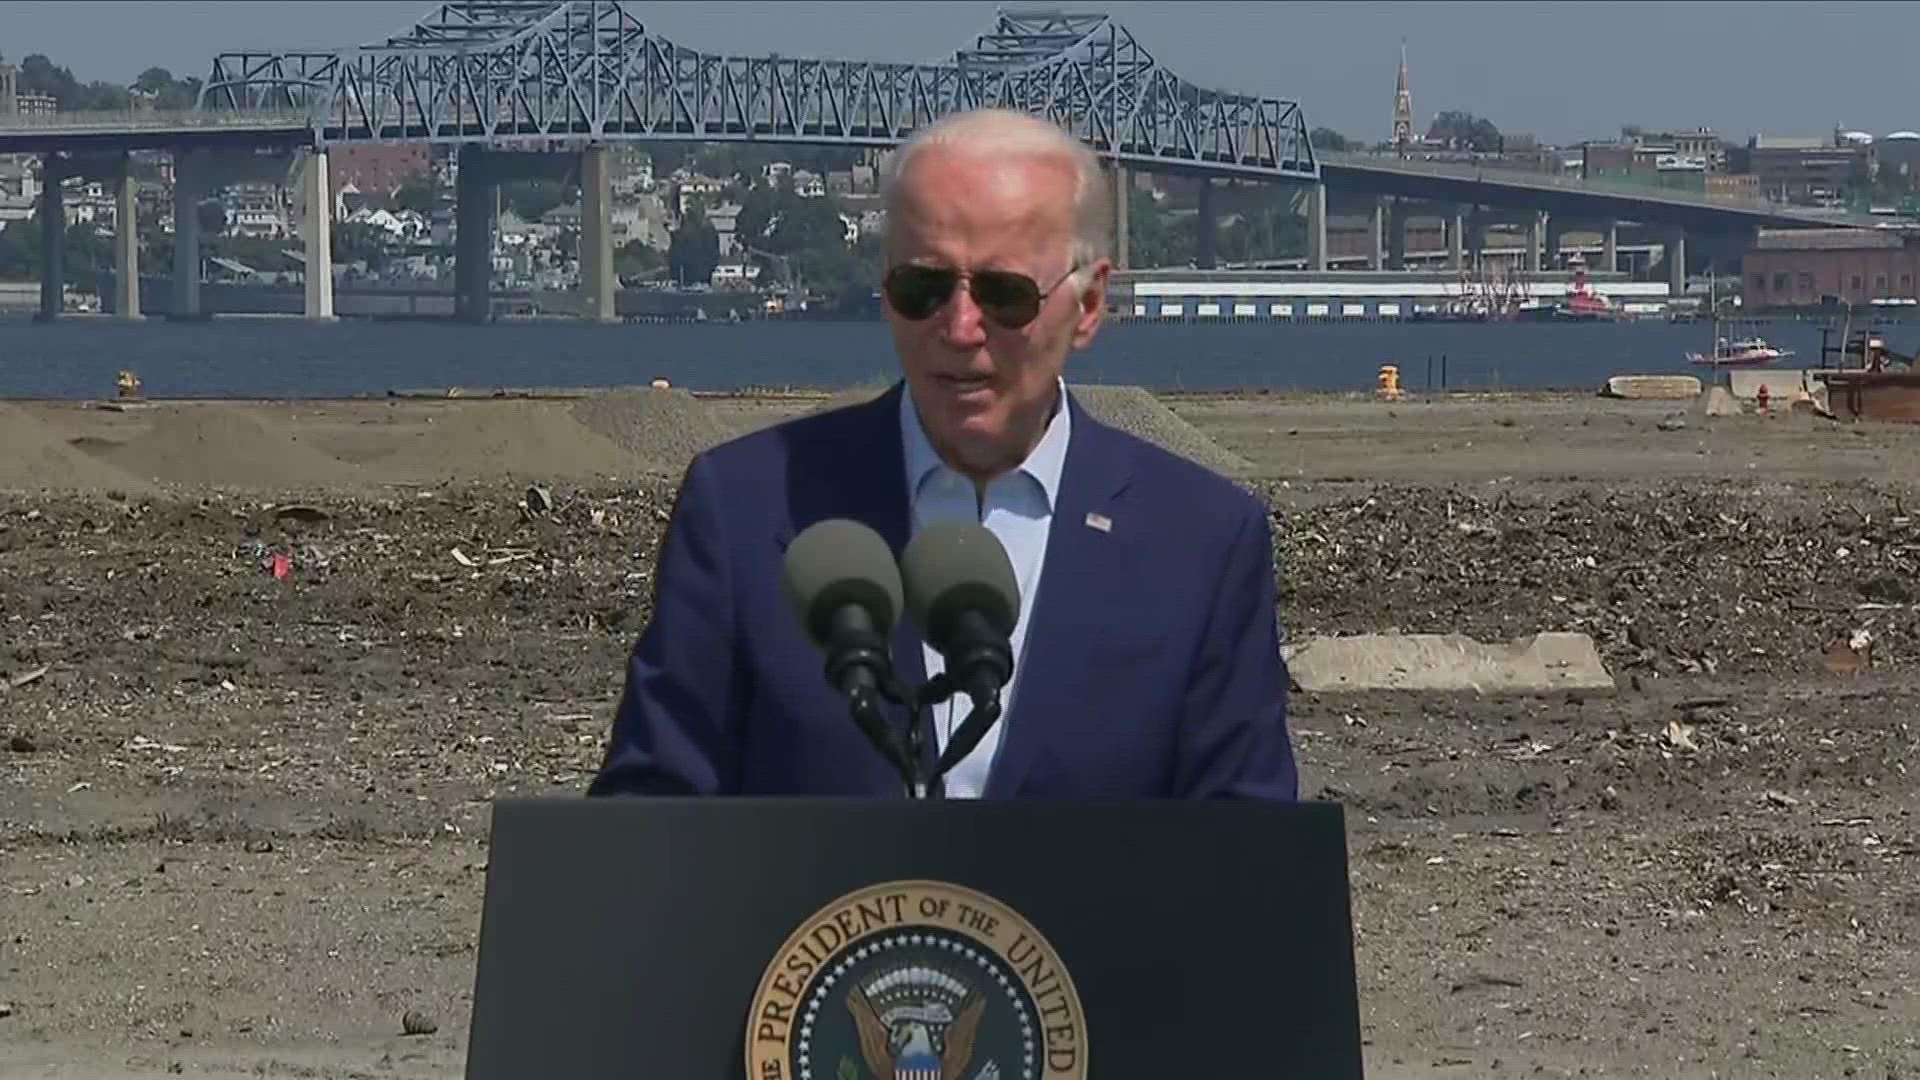 Biden announced a set of executive actions to combat climate change but stopped short of declaring a climate emergency.